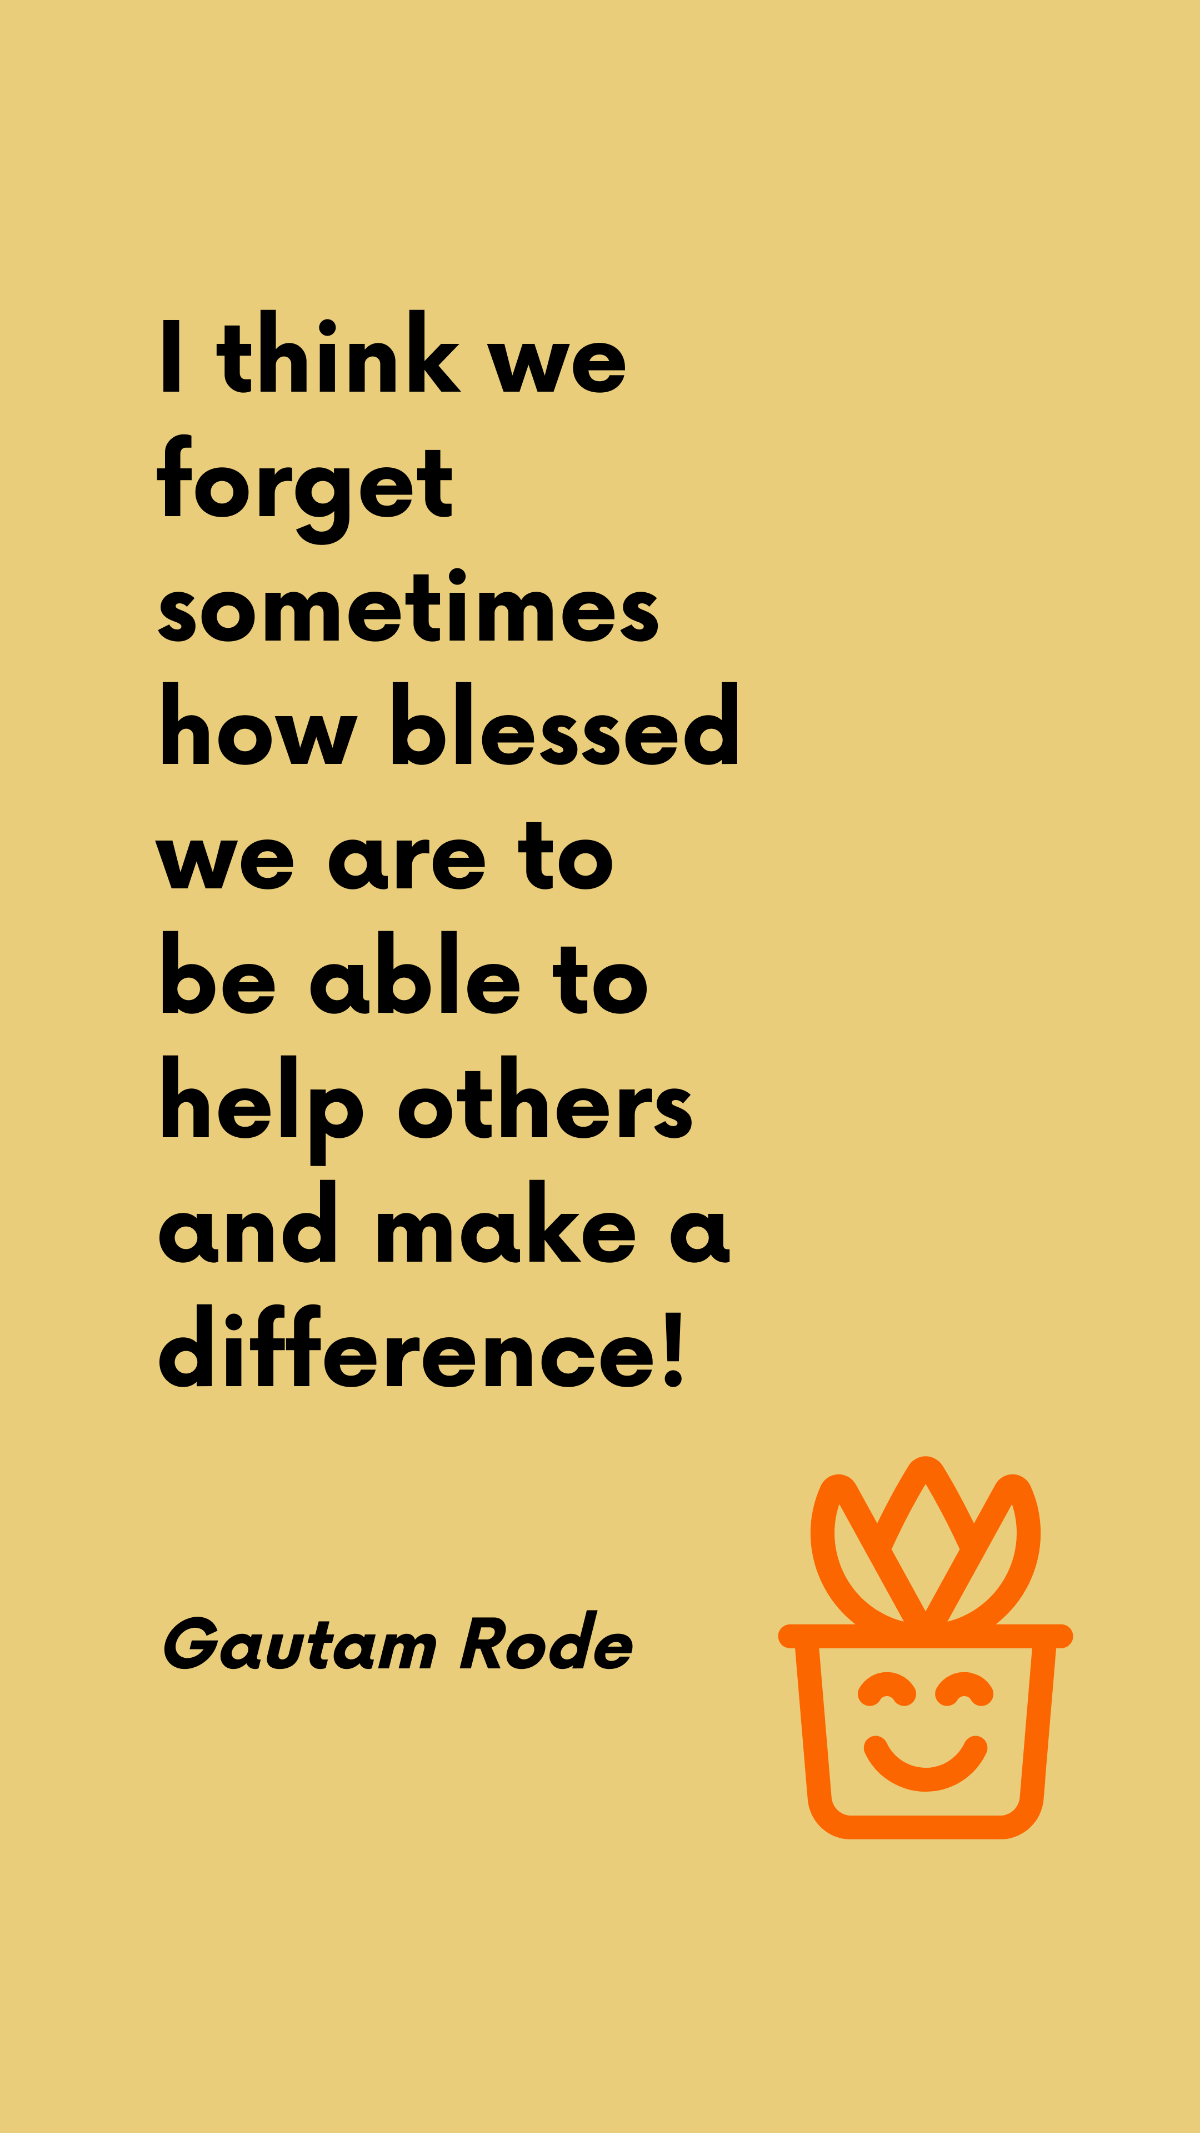 Gautam Rode - I think we forget sometimes how blessed we are to be able to help others and make a difference! Template